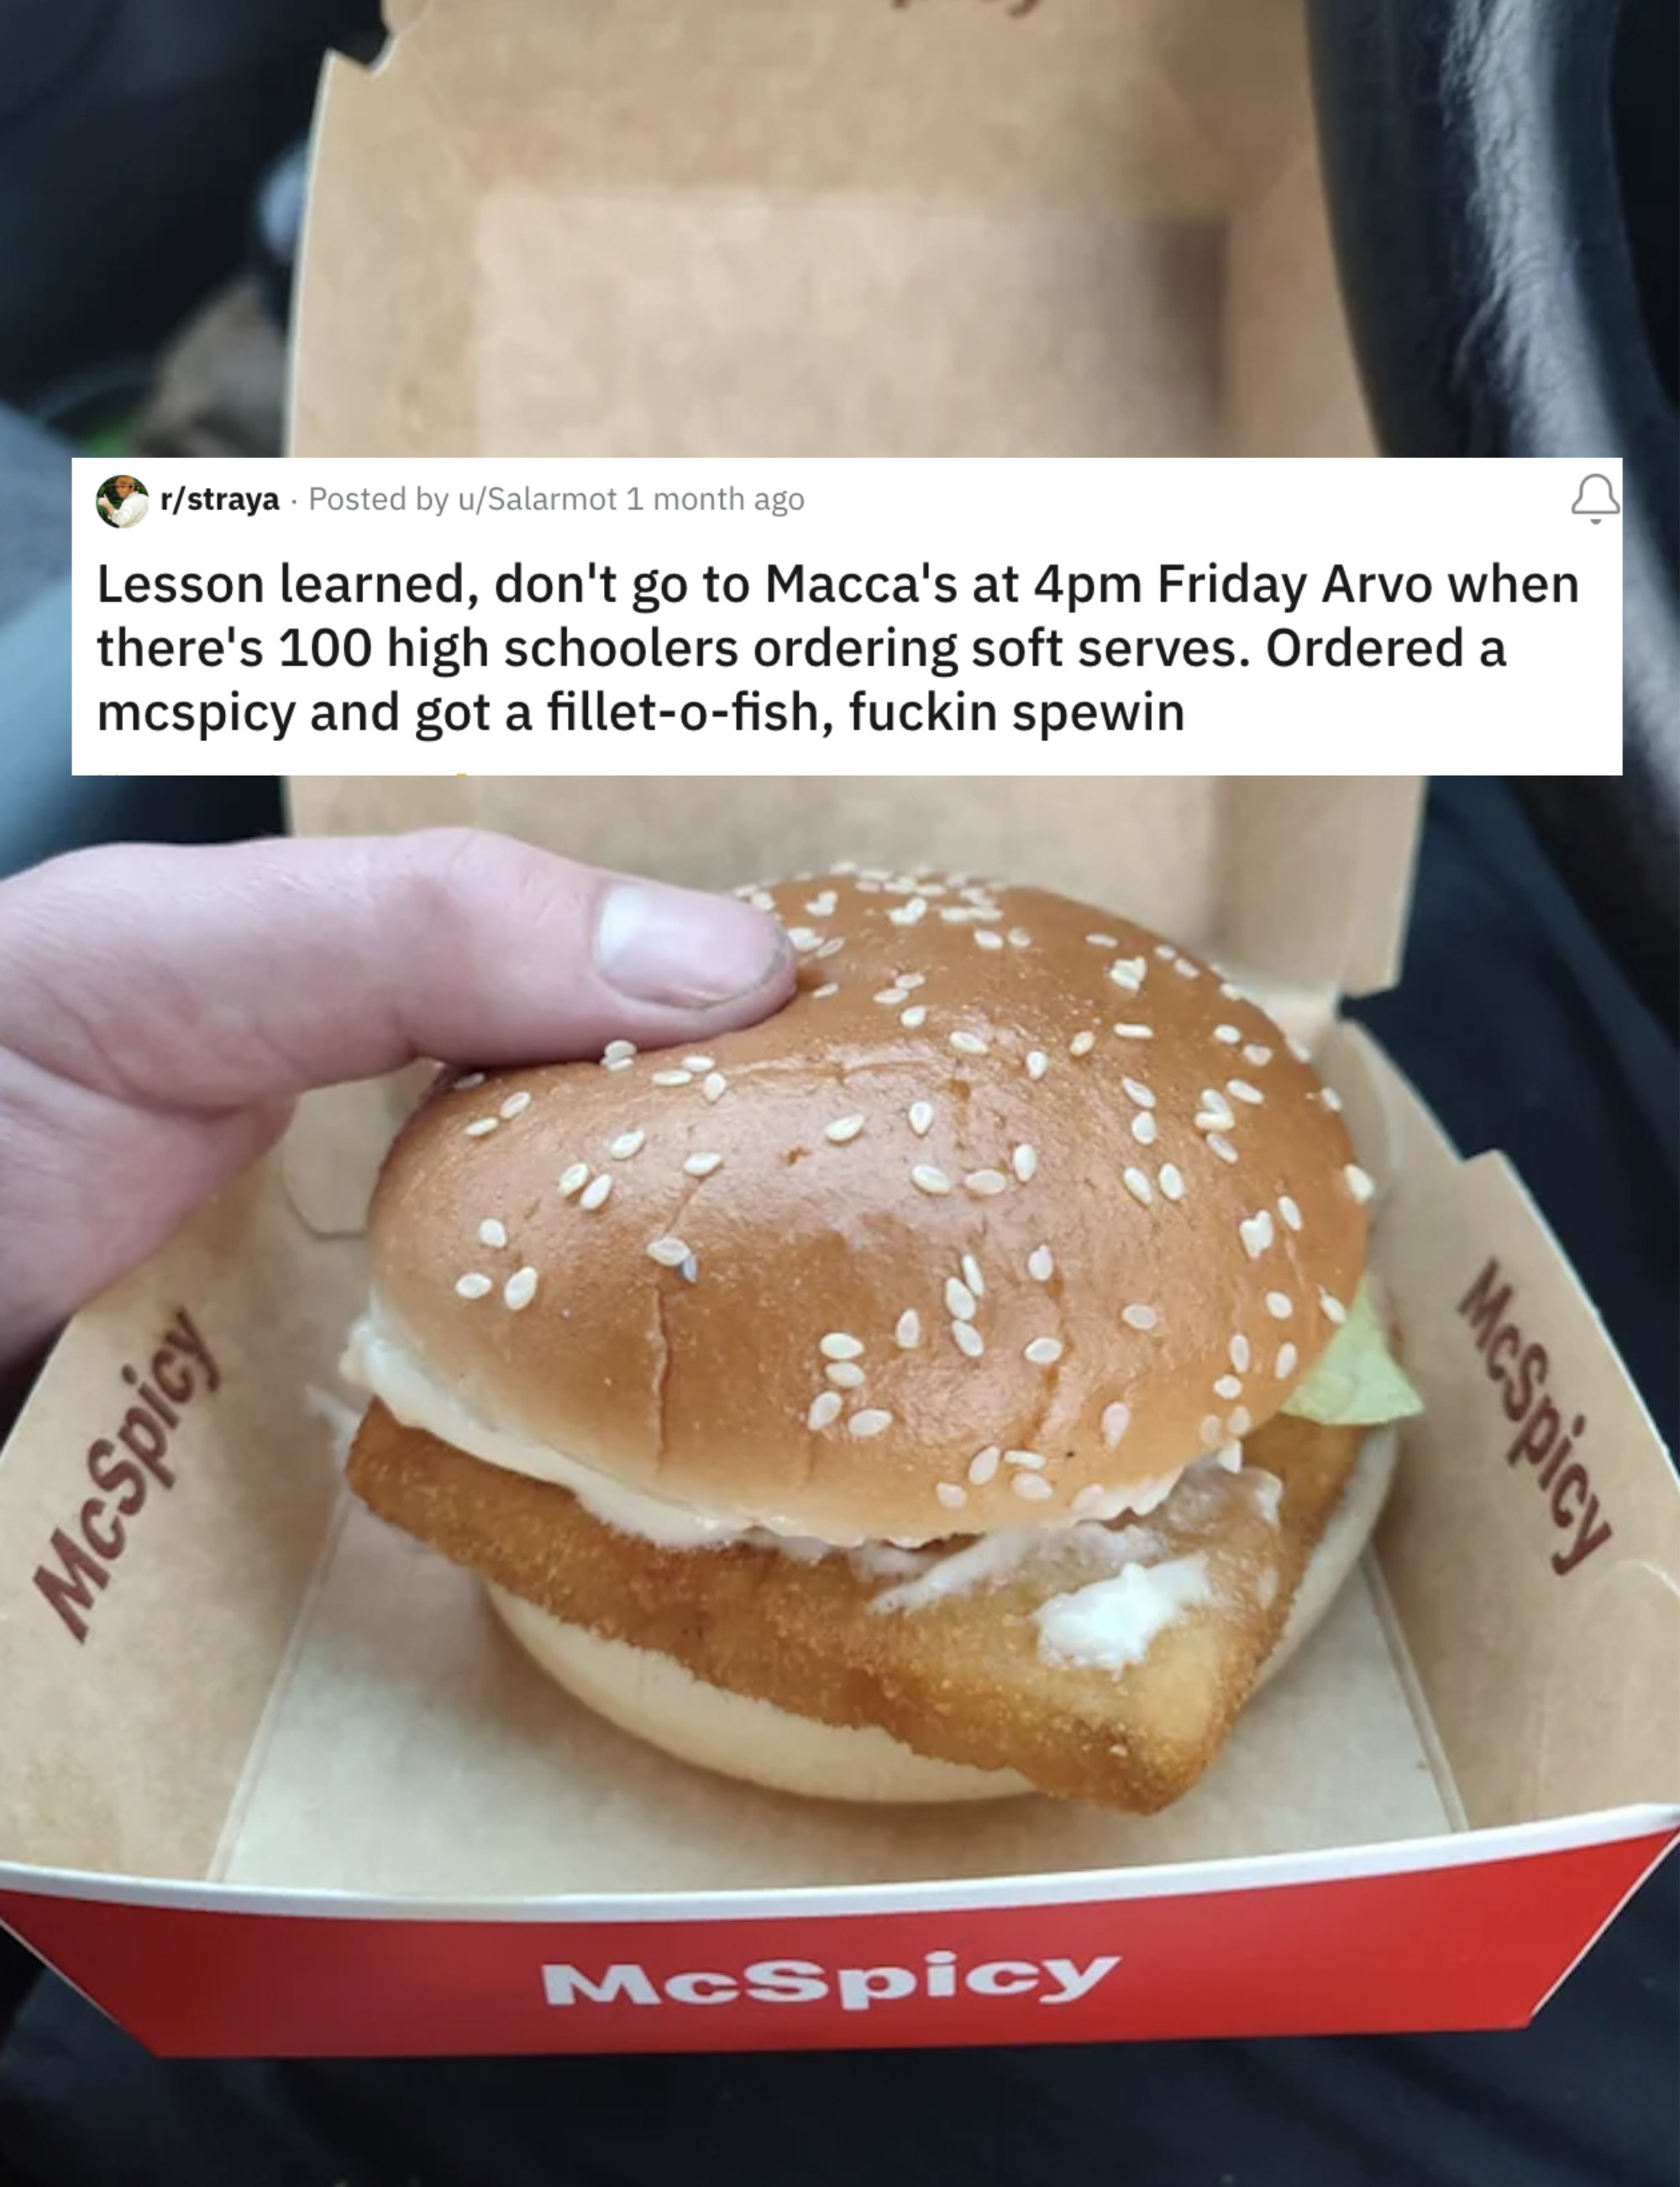 A McDonalds burger with a caption reading &quot;Ordered a mcspicy and got a fillet-o-fish, fuckin spewin&quot;